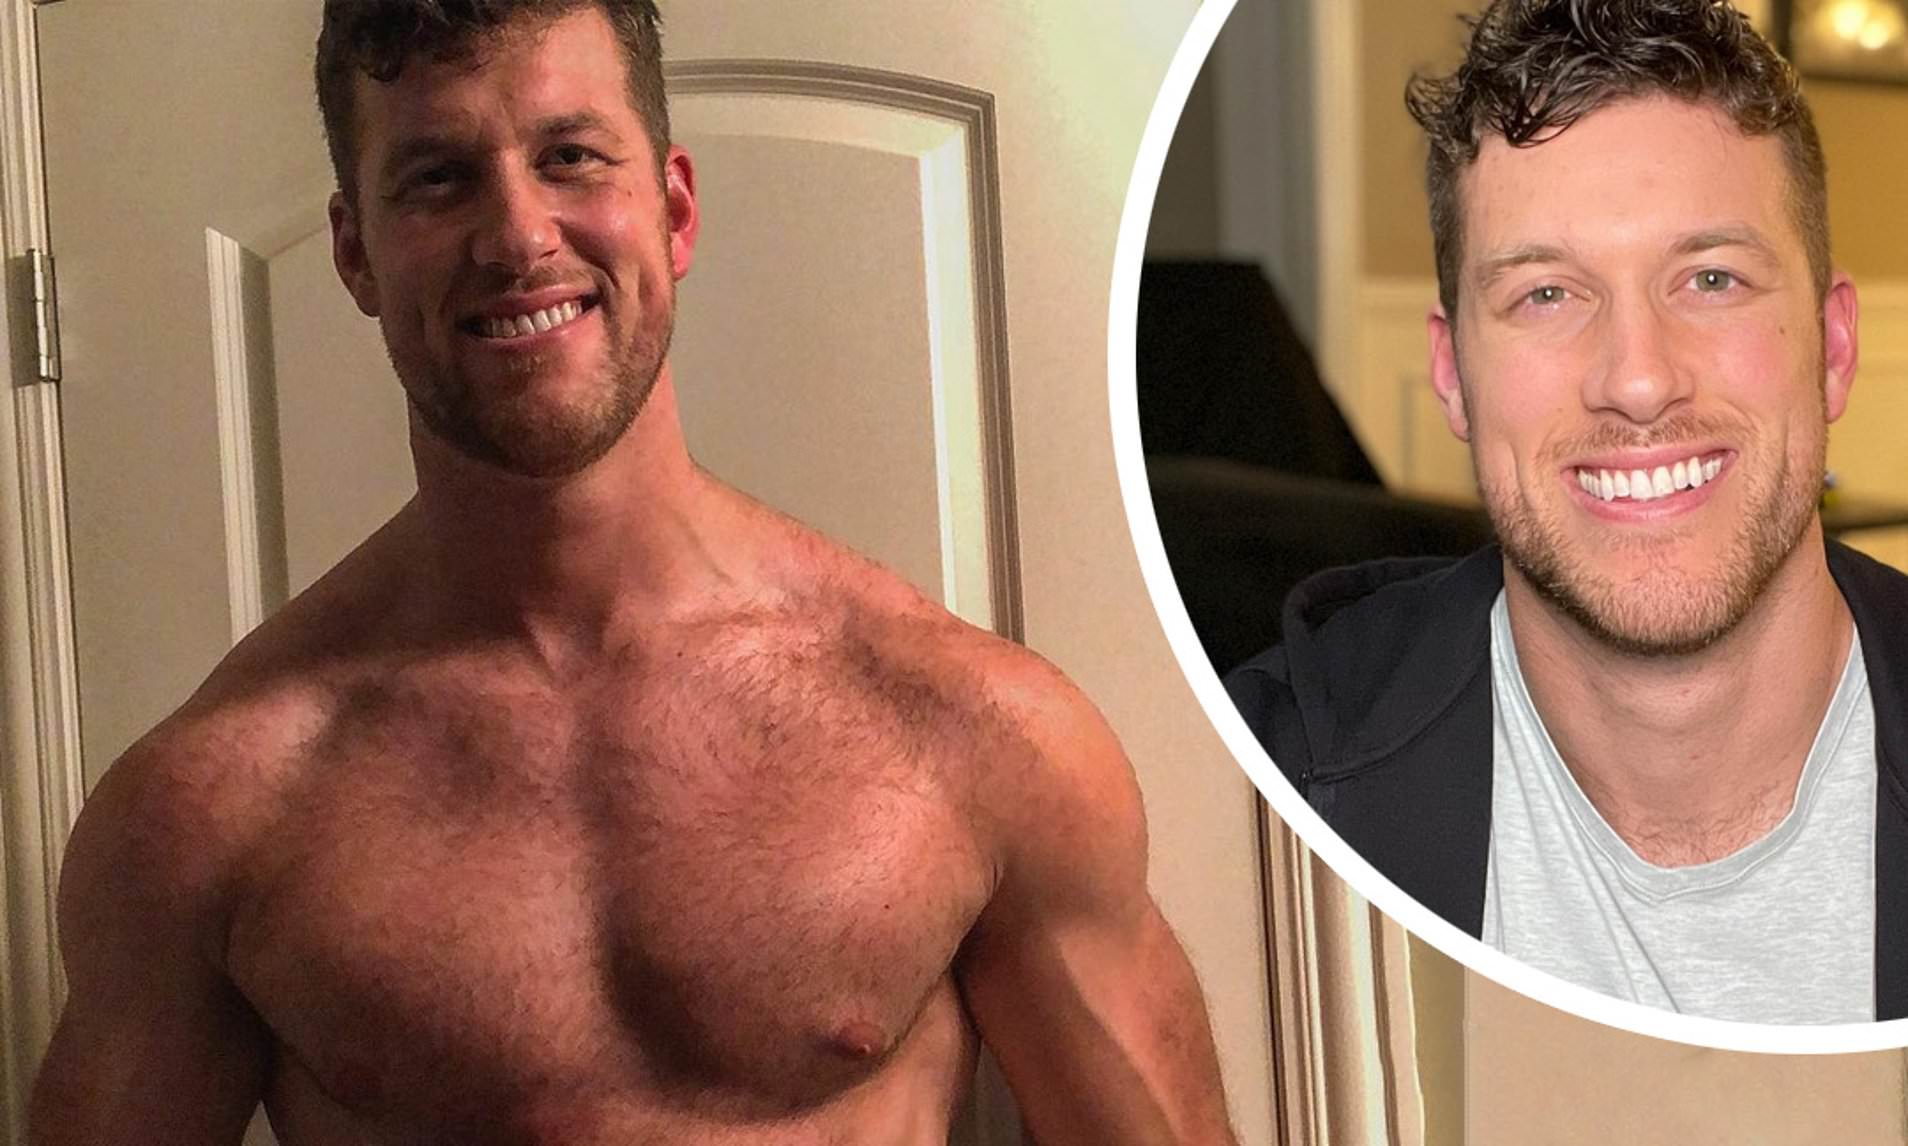 Bachelor Clayton Echard Lead As he’s a wholesome midwestern Gentleman after show sex And racism scandals!